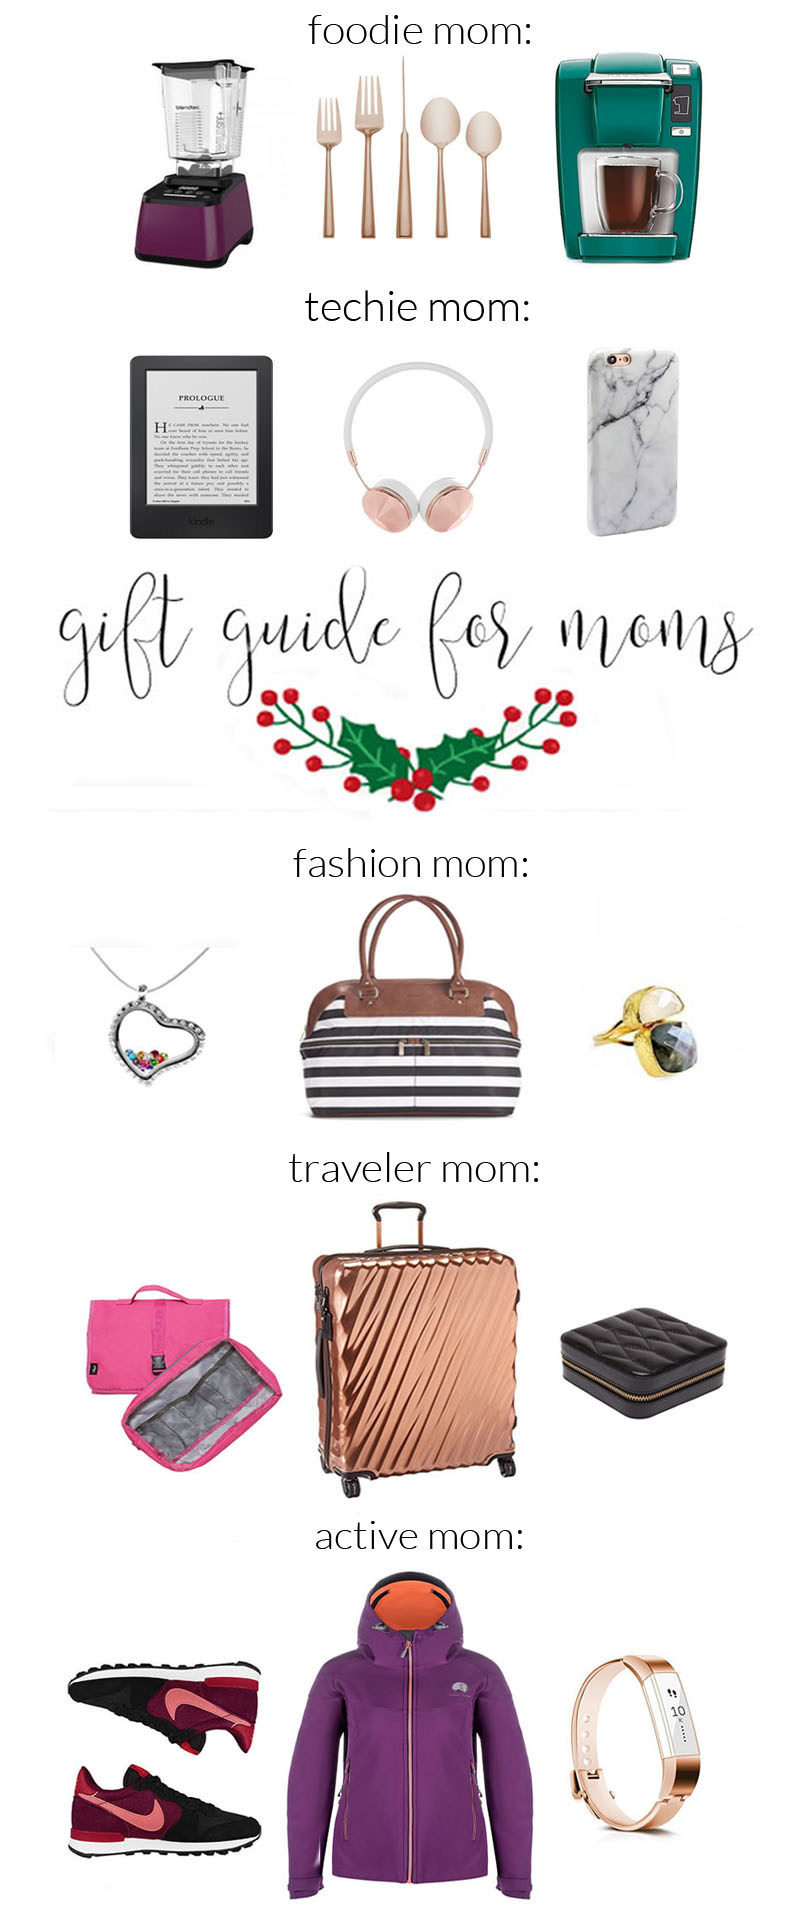 Holiday Gift Guide: Gifts for Cooks - All Things Mamma